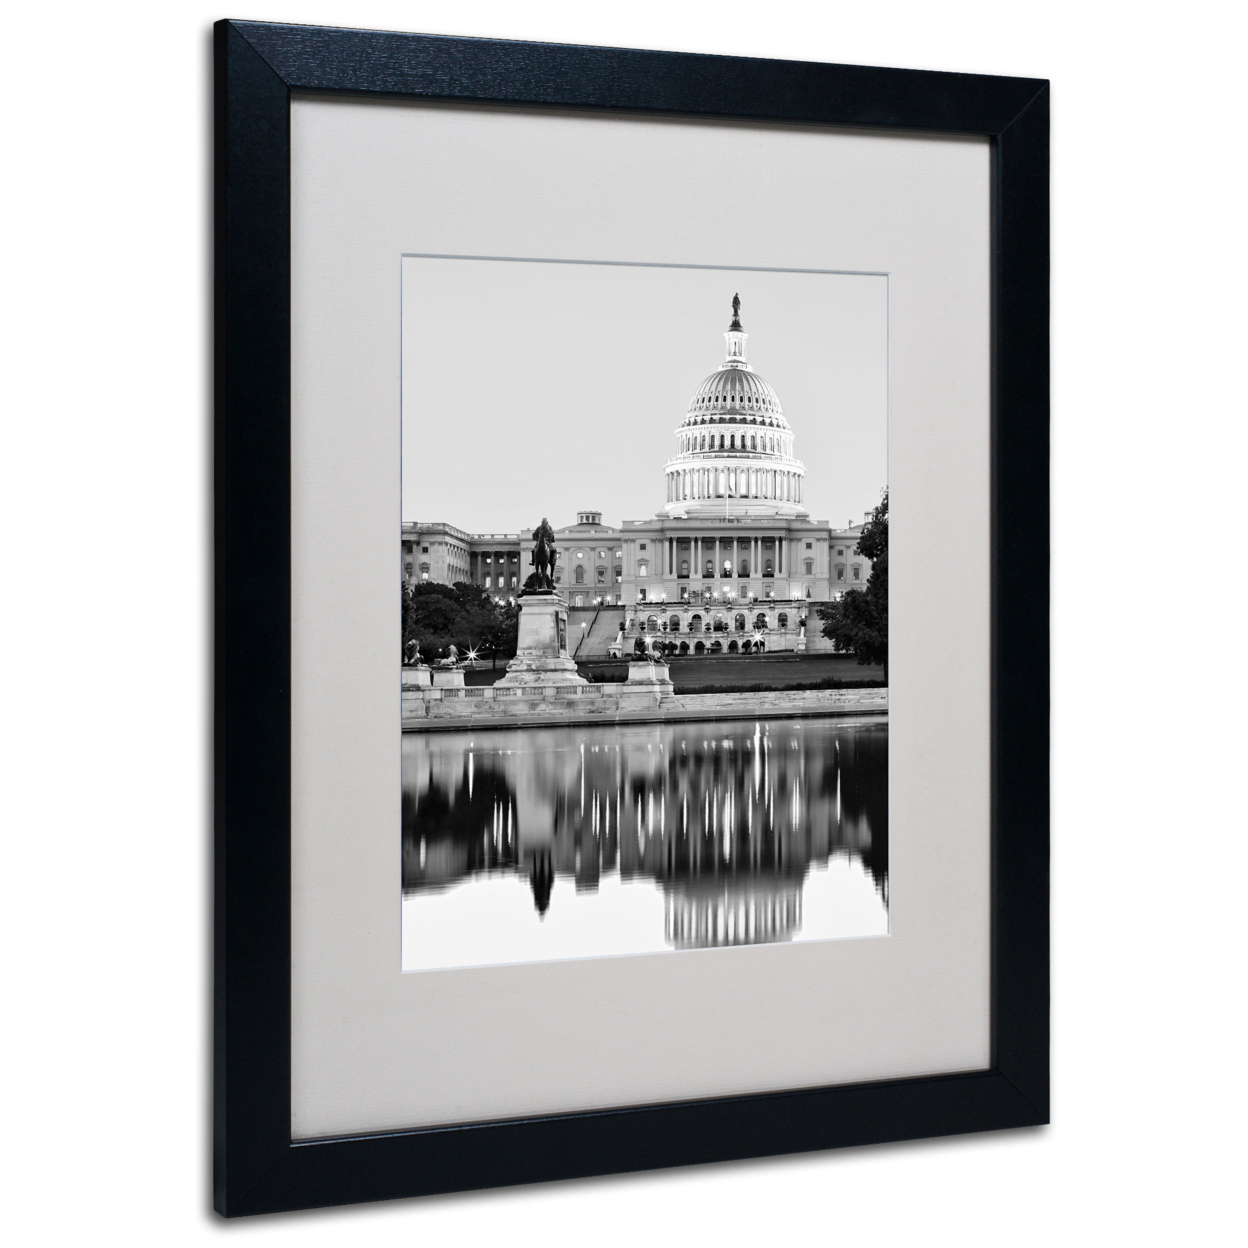 Gregory O'Hanlon 'Capitol Reflections II' Black Wooden Framed Art 18 X 22 Inches